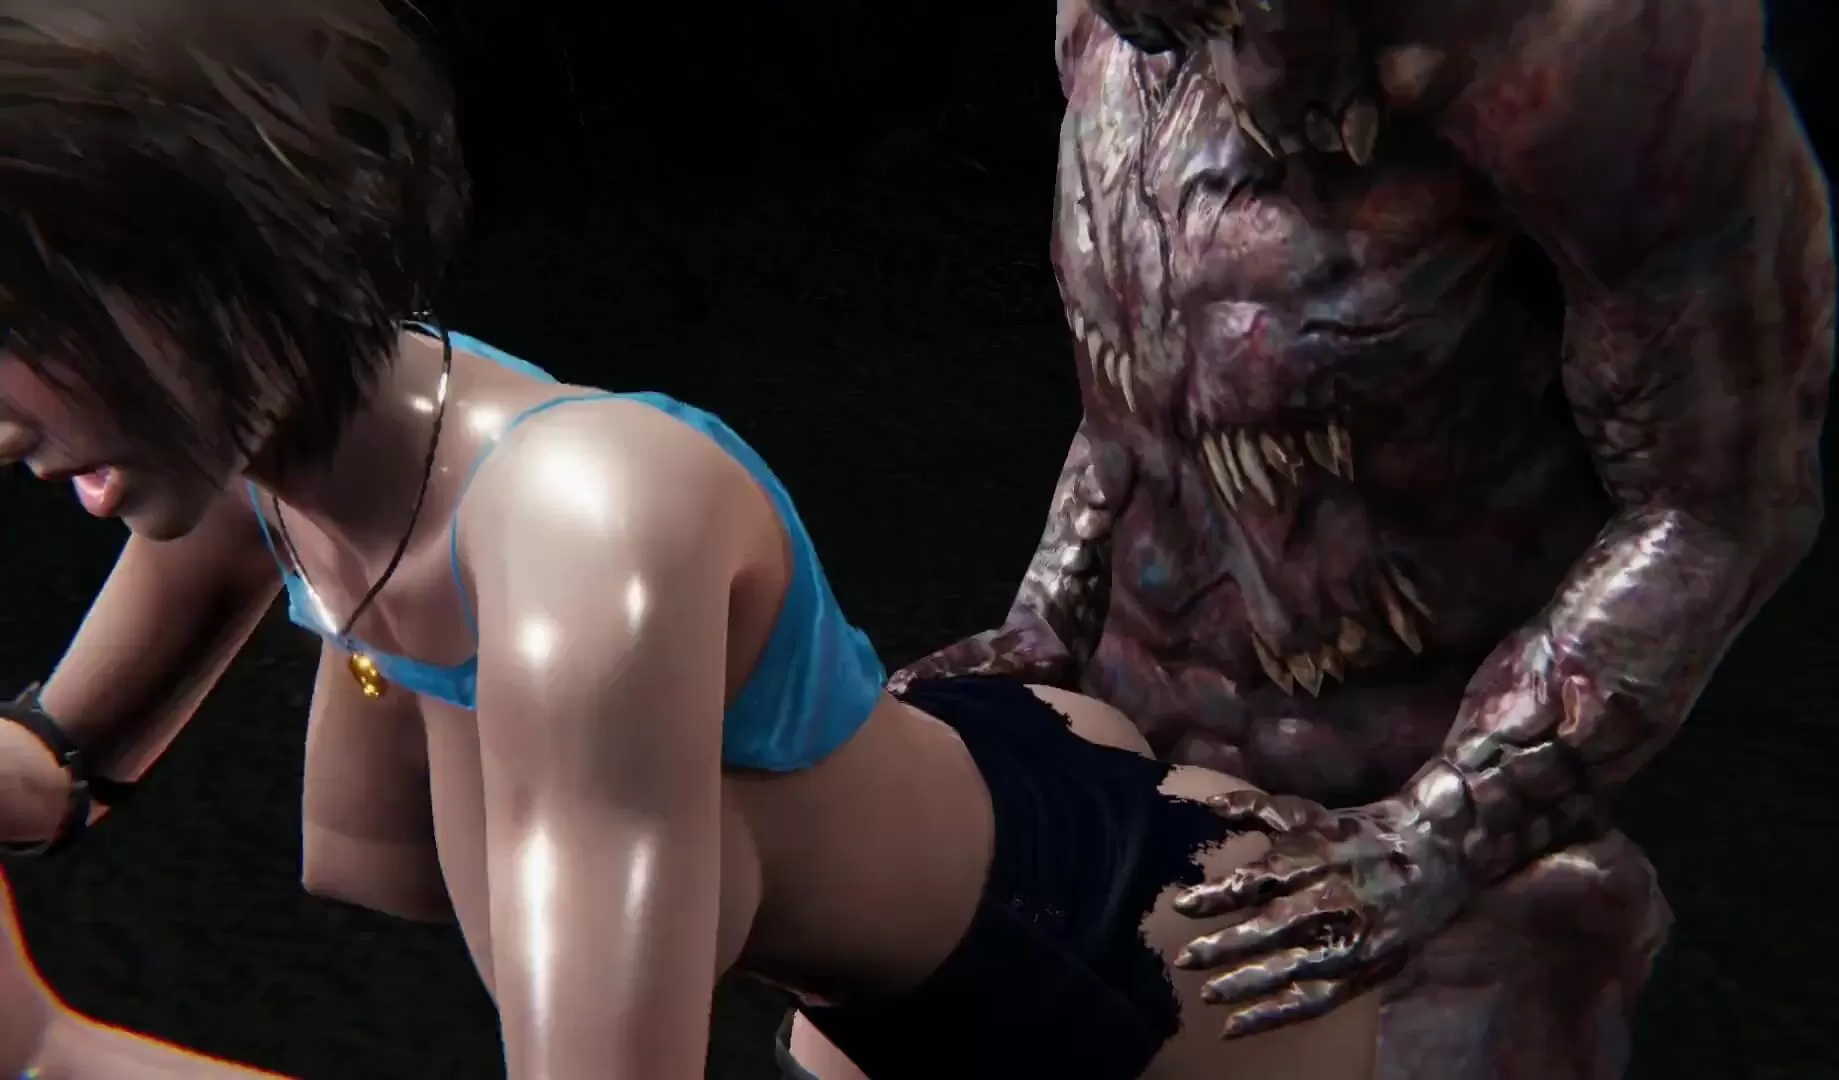 Jill Valentine Resident Evil Anal Zombie Fuck and Deepthroat, ATM,  Squirting 3D Hentai at squirting.world tube